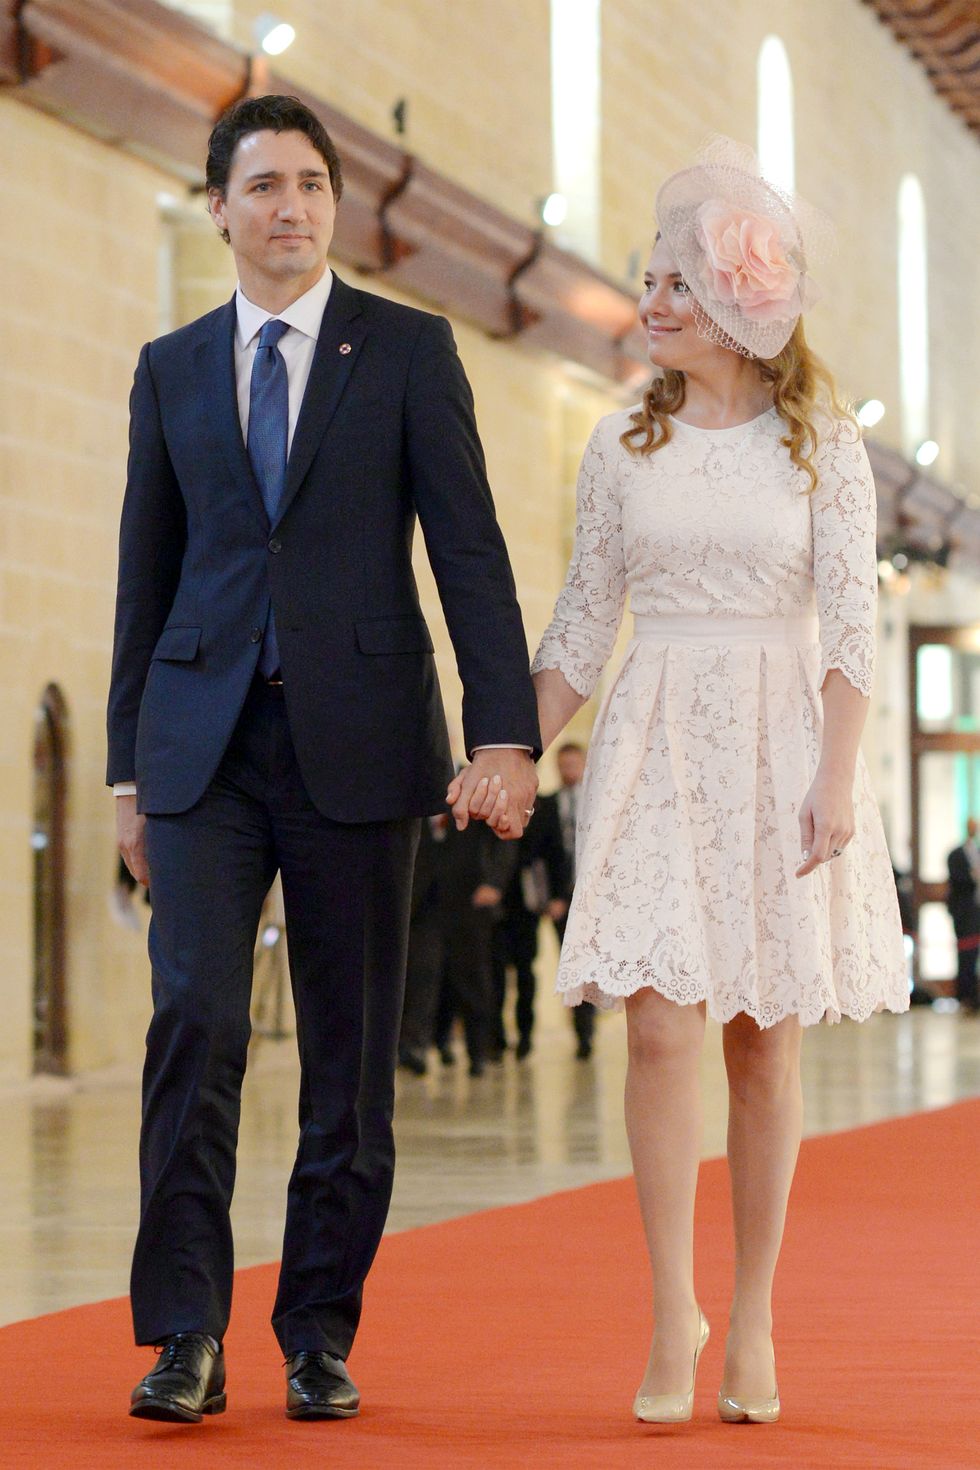 Canadian Prime Minister Justin Trudeau and his wife Sophie Gregoire for the opening ceremony of the Commonwealth Heads of Government Meeting (CHOGM) at the Mediterranean Conference Centre in Valletta on November 27, 2015. The 2015 Commonwealth Summit kicks off today to a grand opening ceremony with Queen Elizabeth II, followed by intense working sessions where world leaders will grapple with climate change. As the clock ticks to a UN climate conference in Paris starting Monday, leaders including France's Francois Hollande, Britain's David Cameron and the UN's Ban Ki-moon will try to open the door to a landmark accord for taming greenhouse gases.    AFP PHOTO / MATTHEW MIRABELLI  --- MALTA OUT / AFP / Matthew Mirabelli        (Photo credit should read MATTHEW MIRABELLI/AFP/Getty Images)